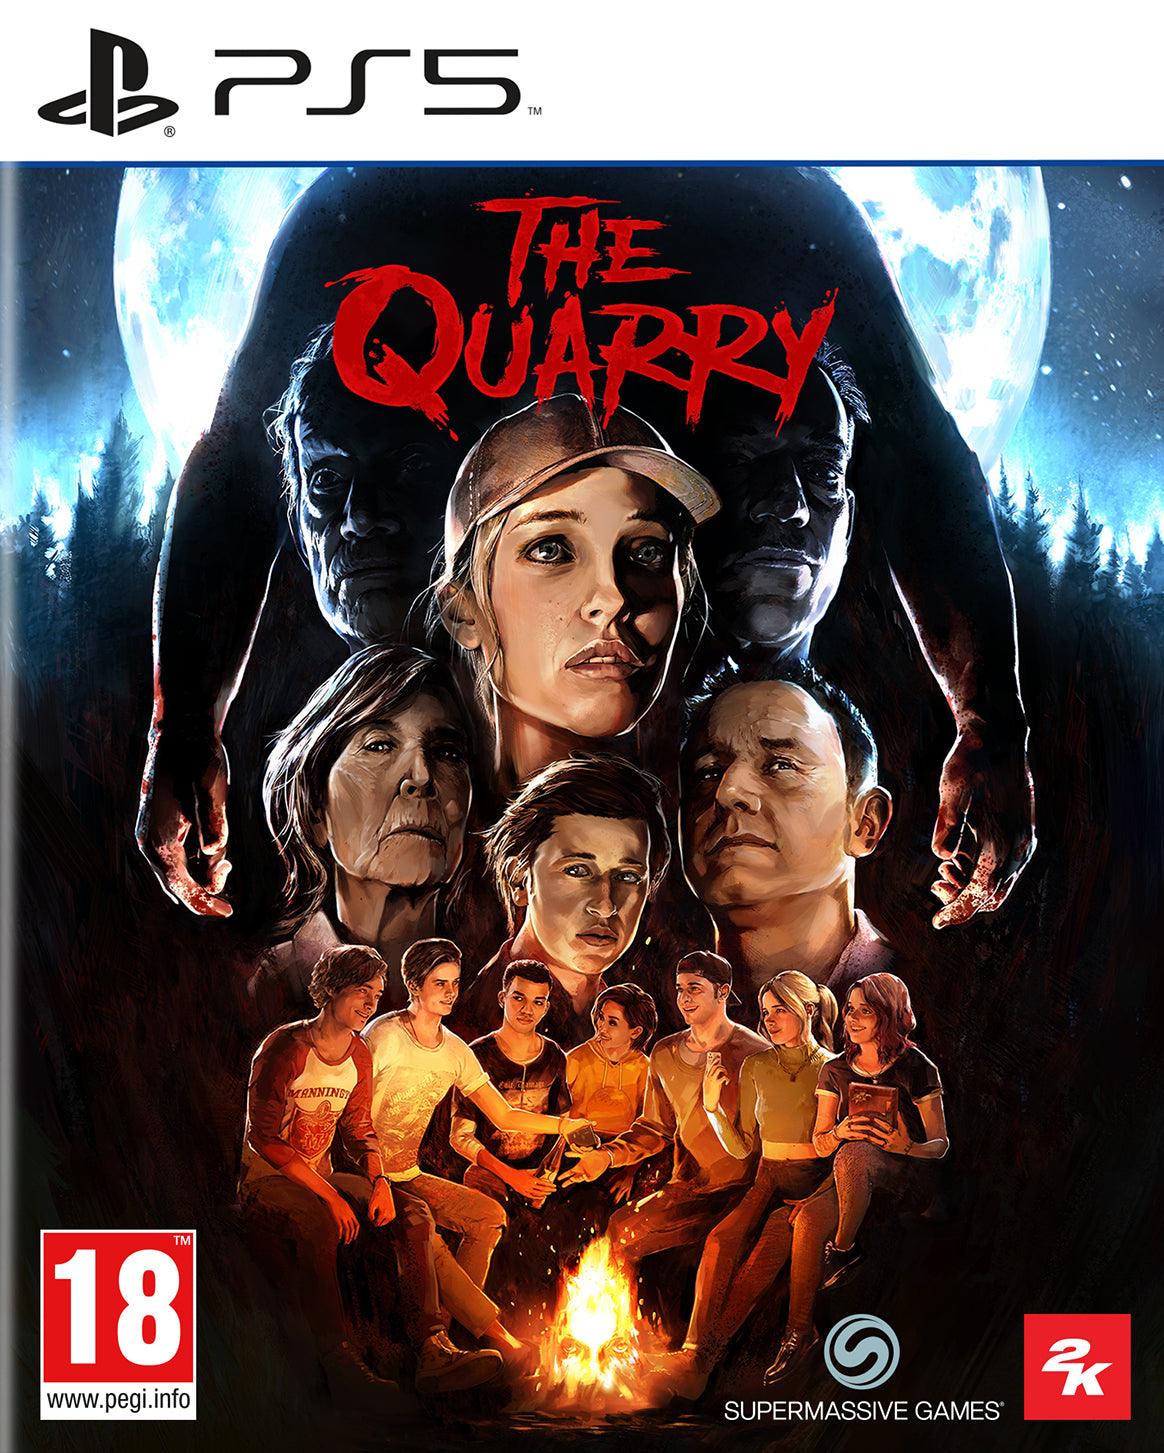 The Quarry - Want a New Gadget